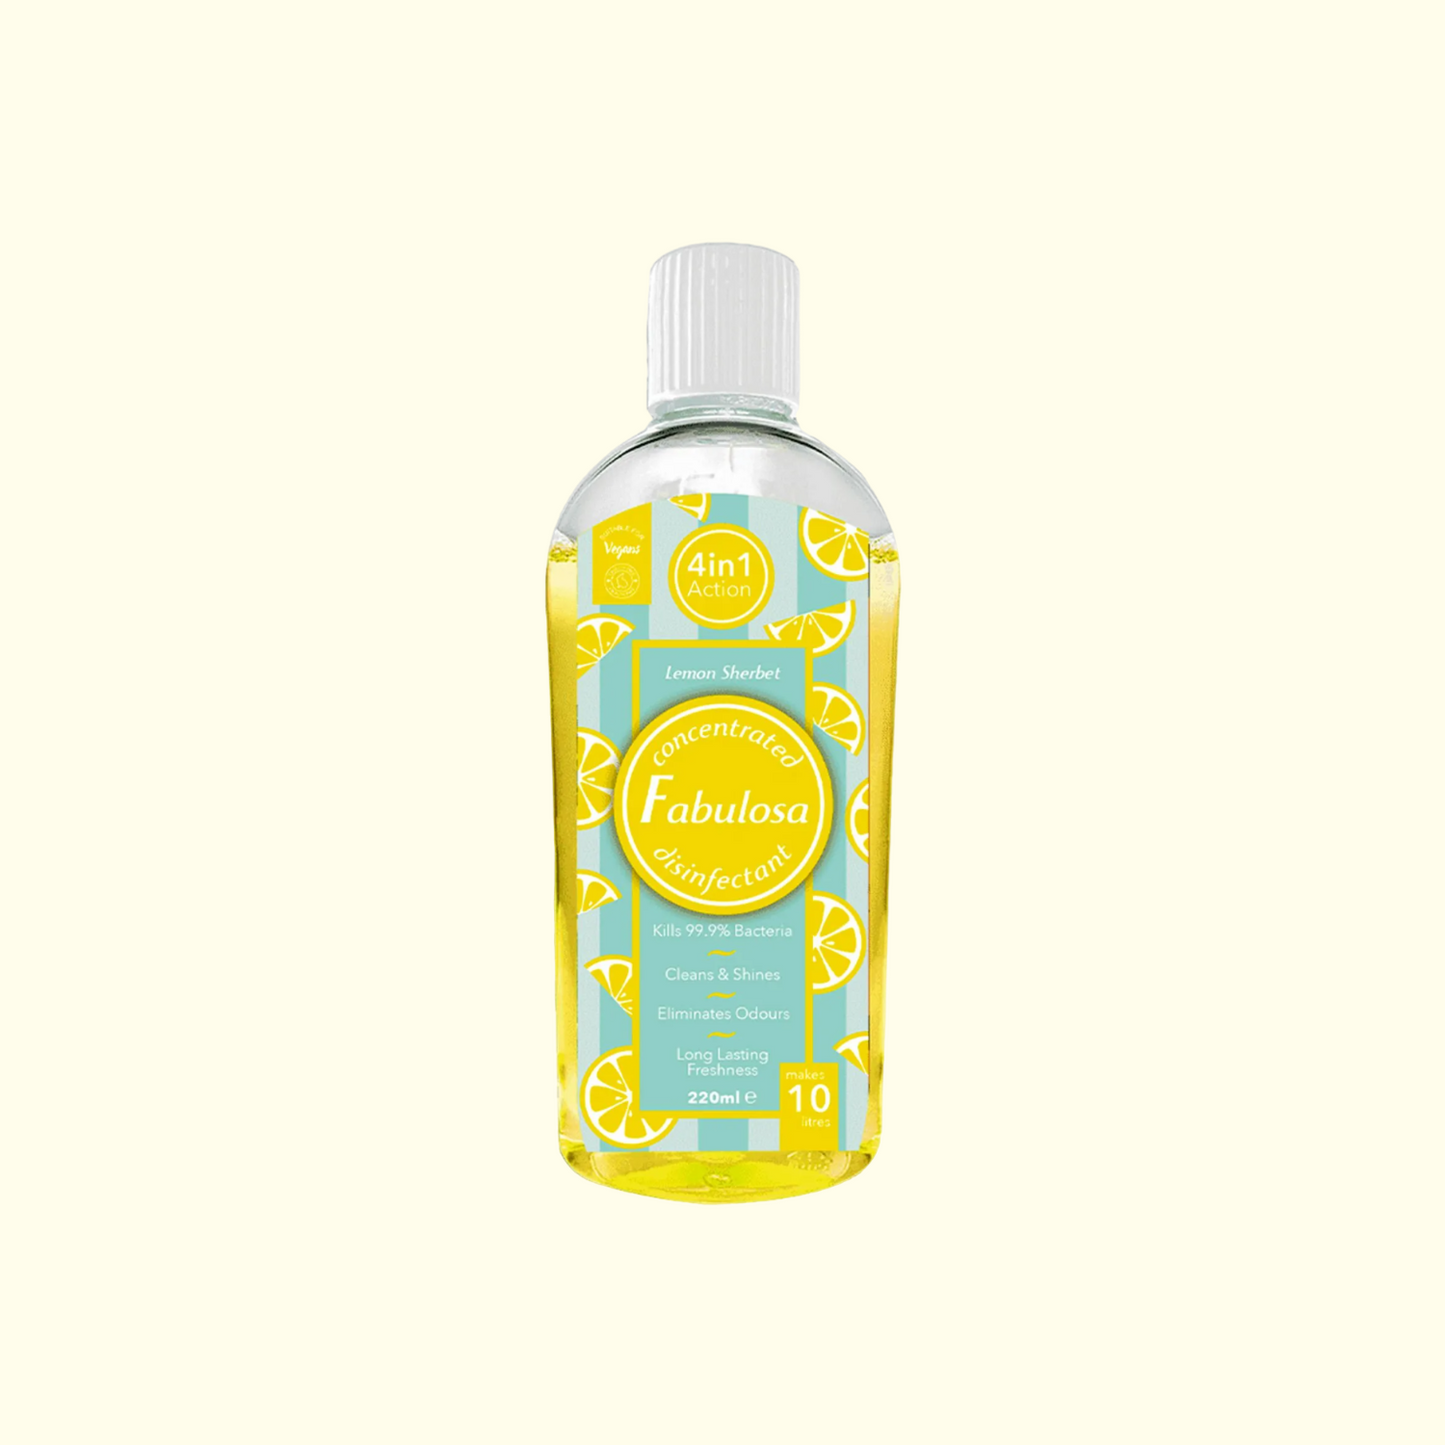 Fabulosa Concentrated 4 in 1 Disinfectant Lemon Sherbet 220mL